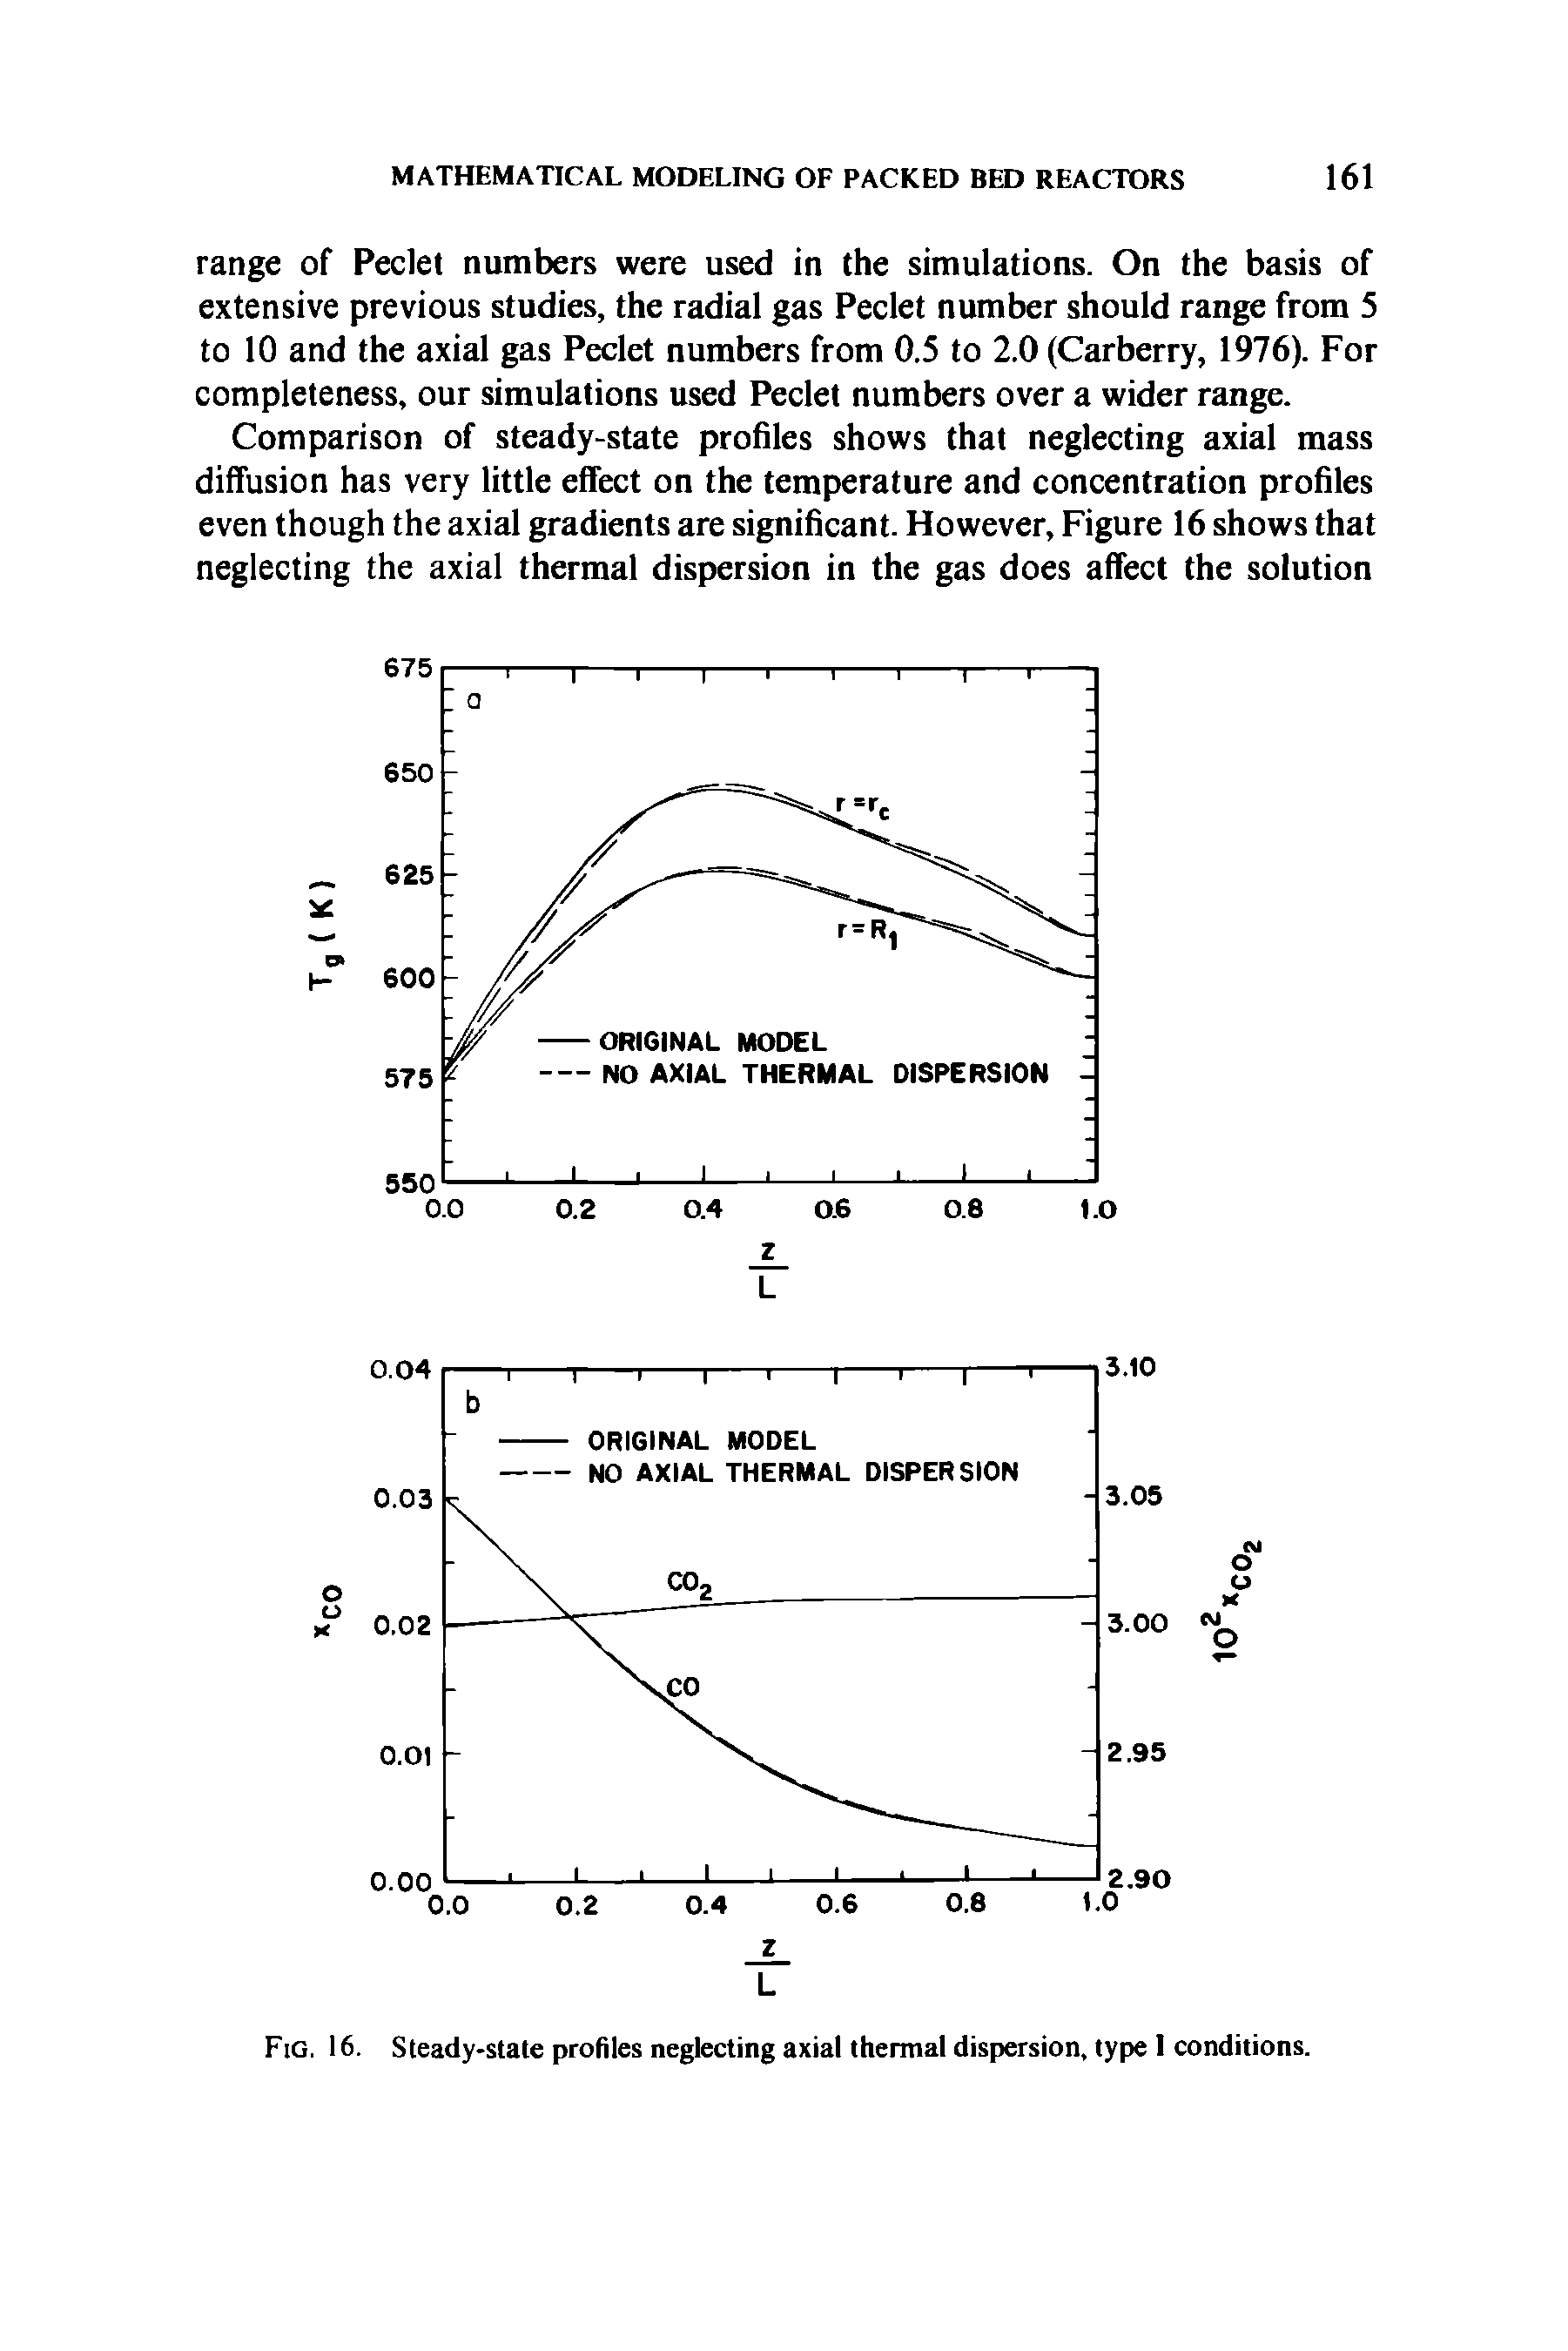 Fig. 16. Steady-state profiles neglecting axial thermal dispersion, type I conditions.